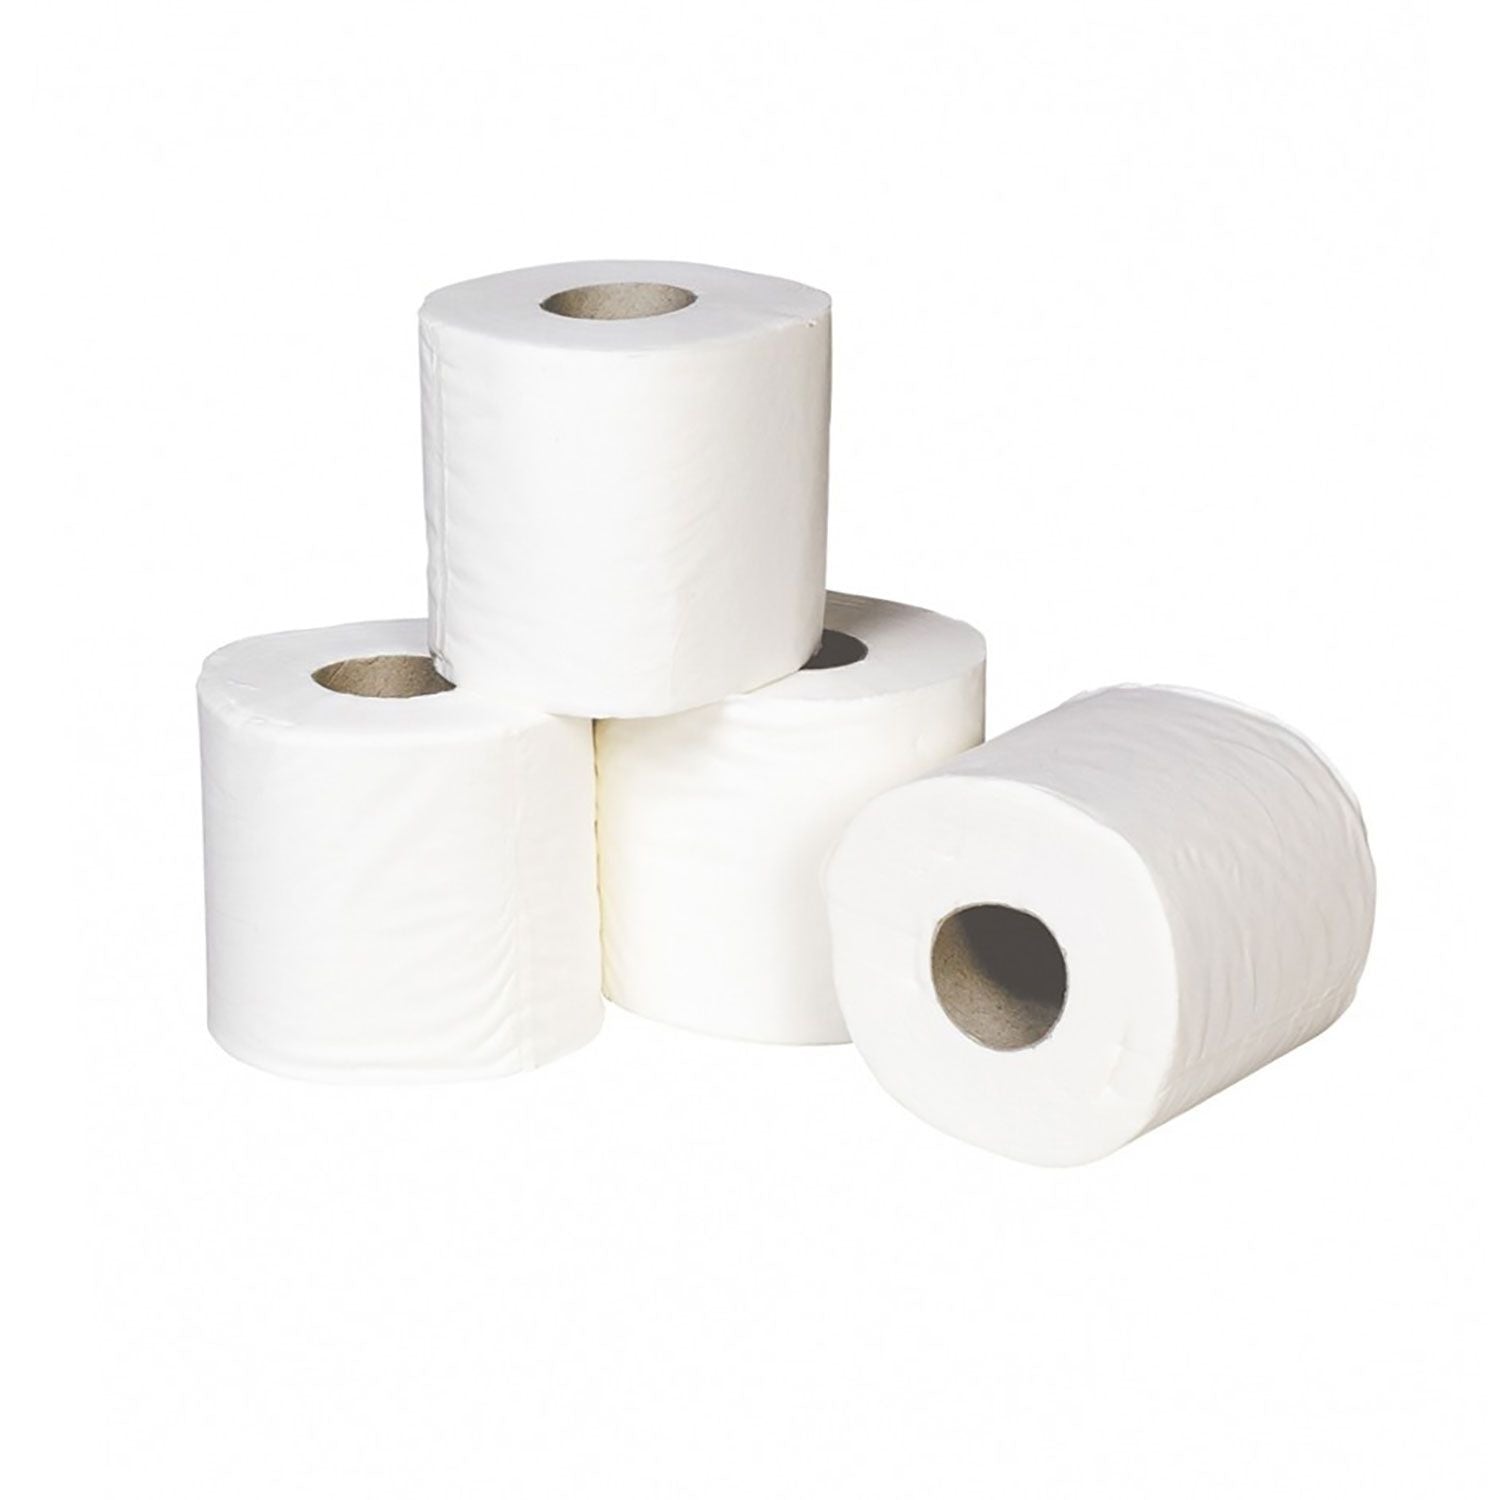 Toilet Rolls | Small | Pack of 36 Rolls (200 Sheets per Roll)